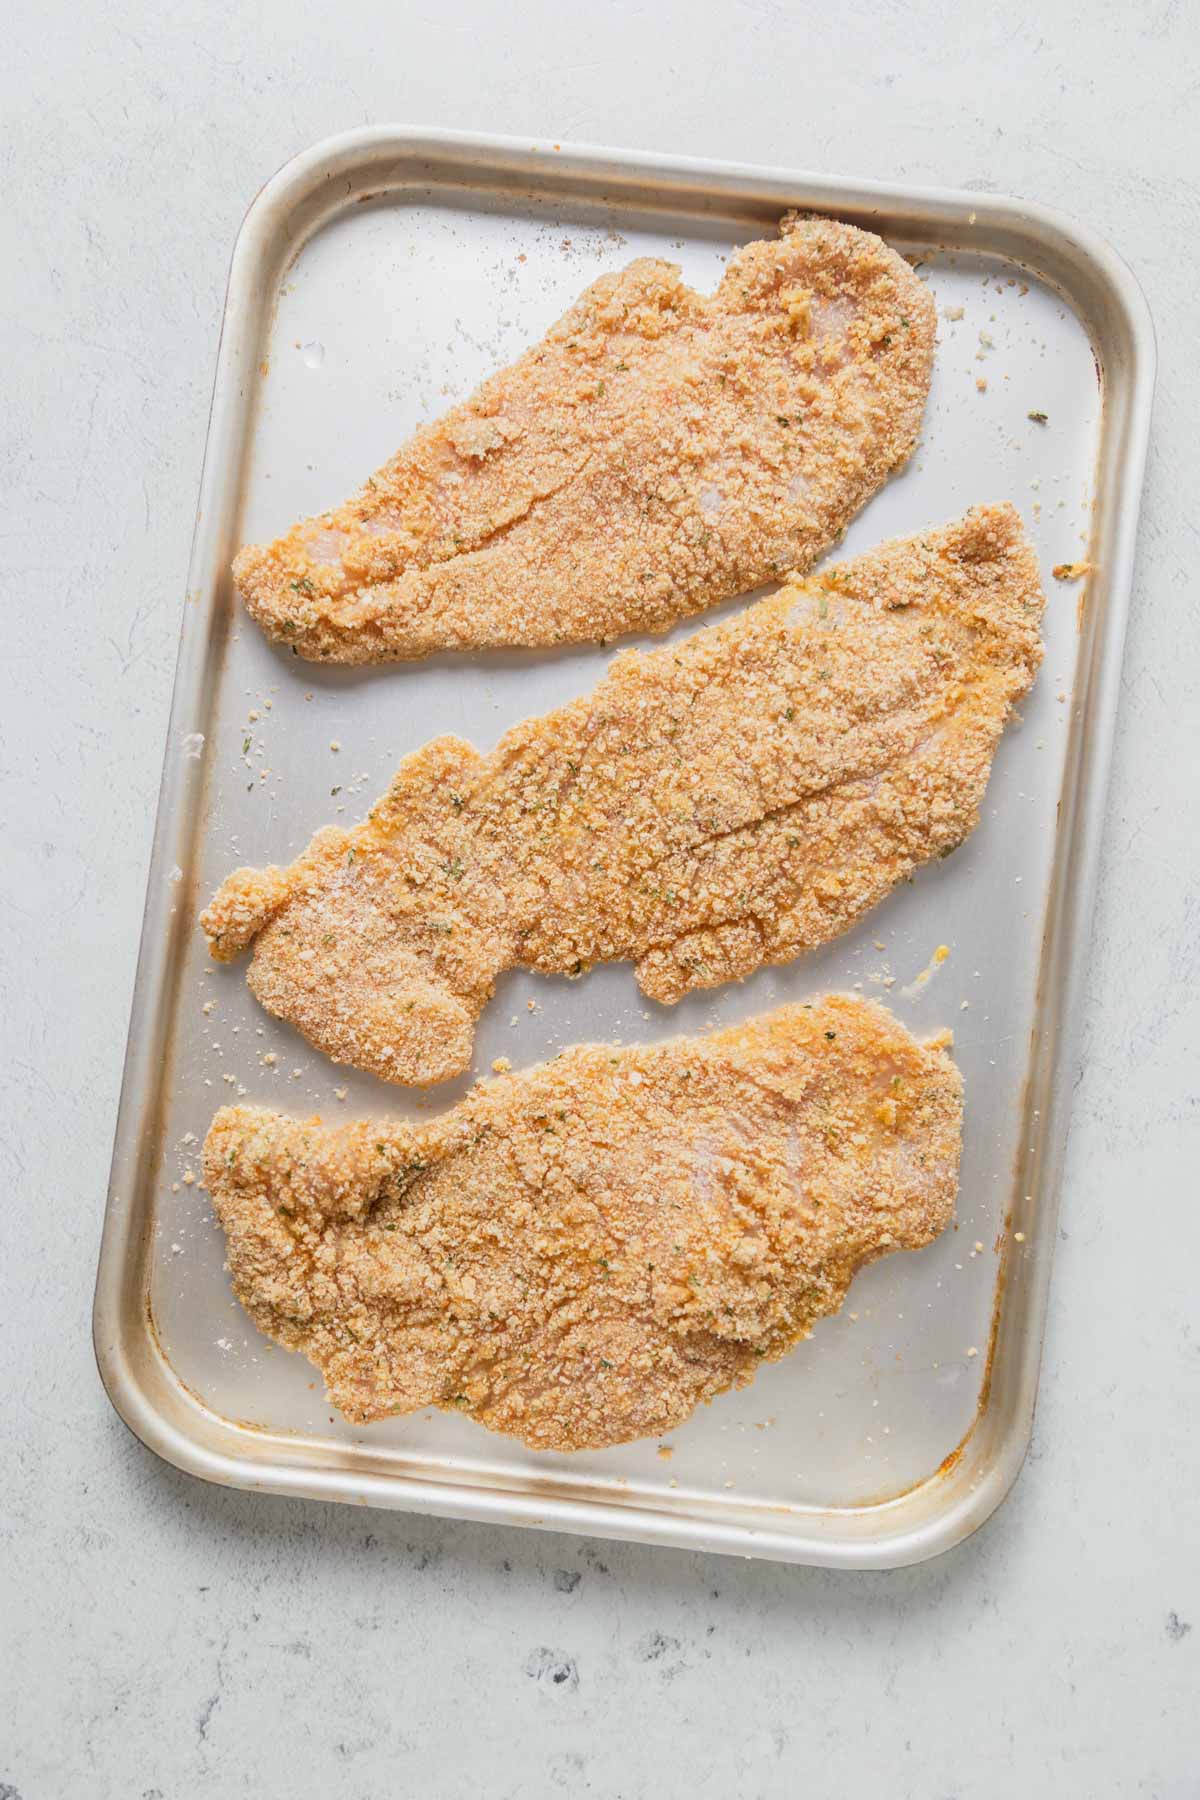 breaded chicken slices on a baking tray.